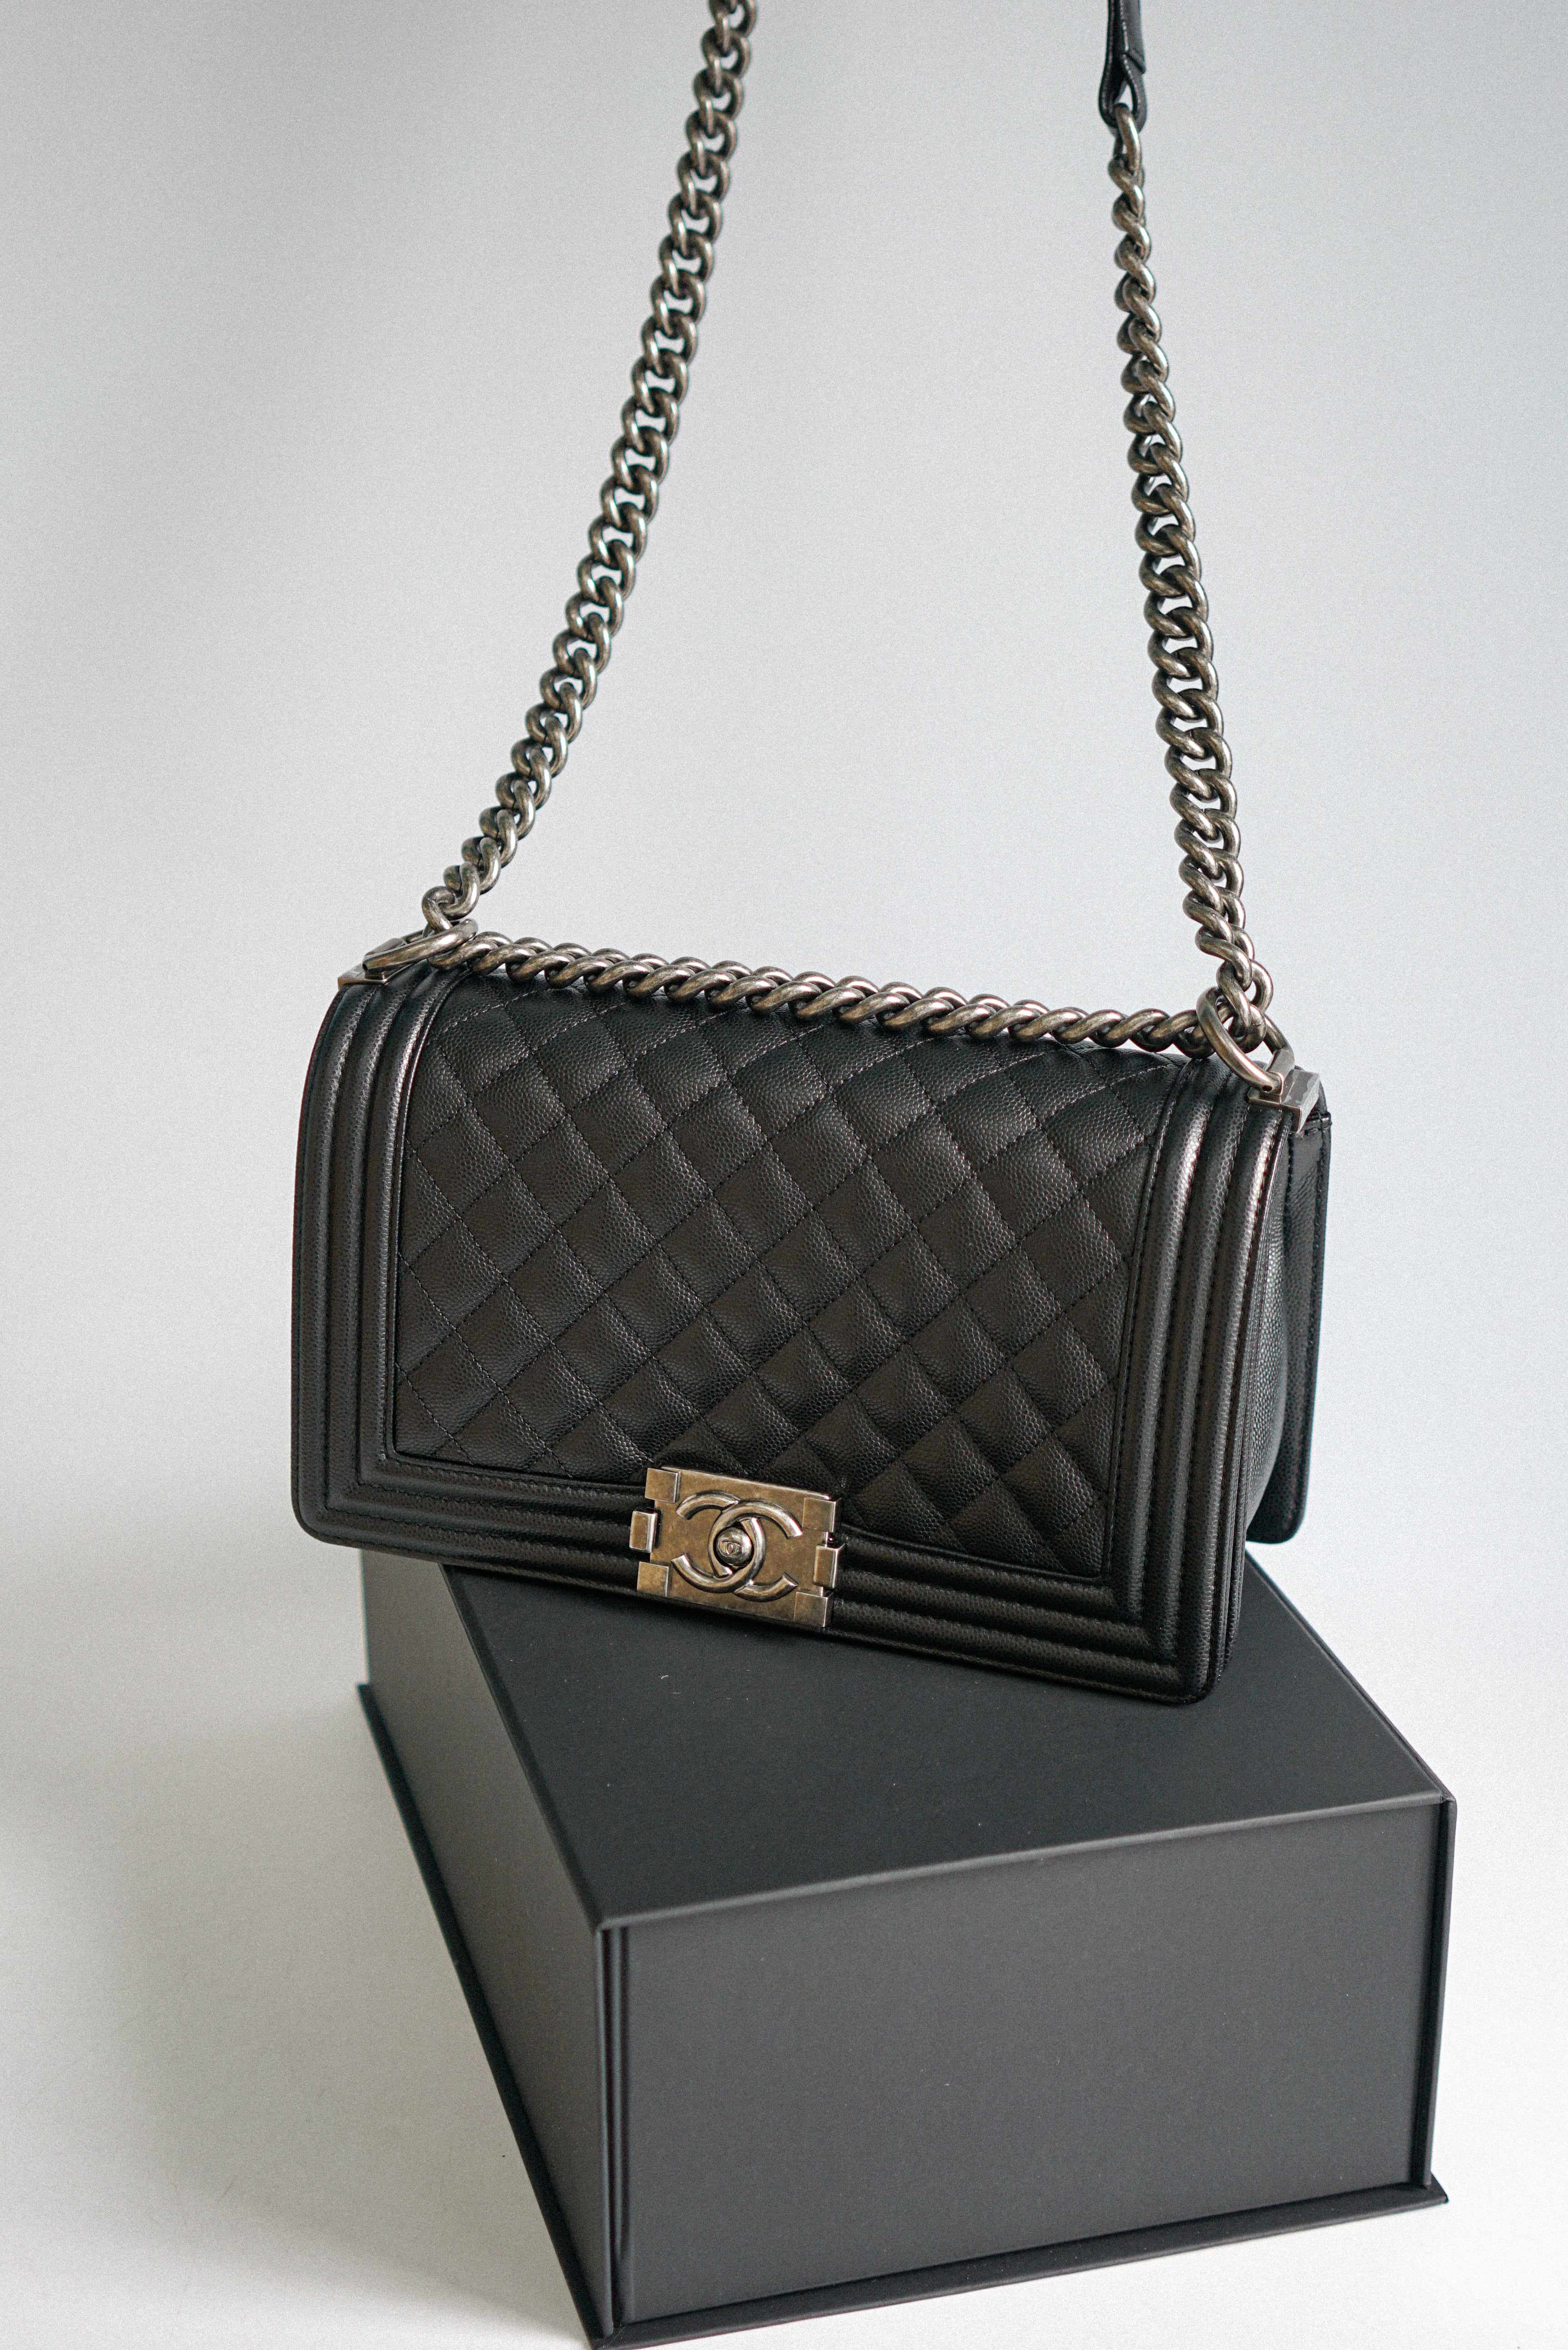 Chanel Boy Old Medium in Black Caviar Leather and Aged Ruthenium Hardware (Microchip)